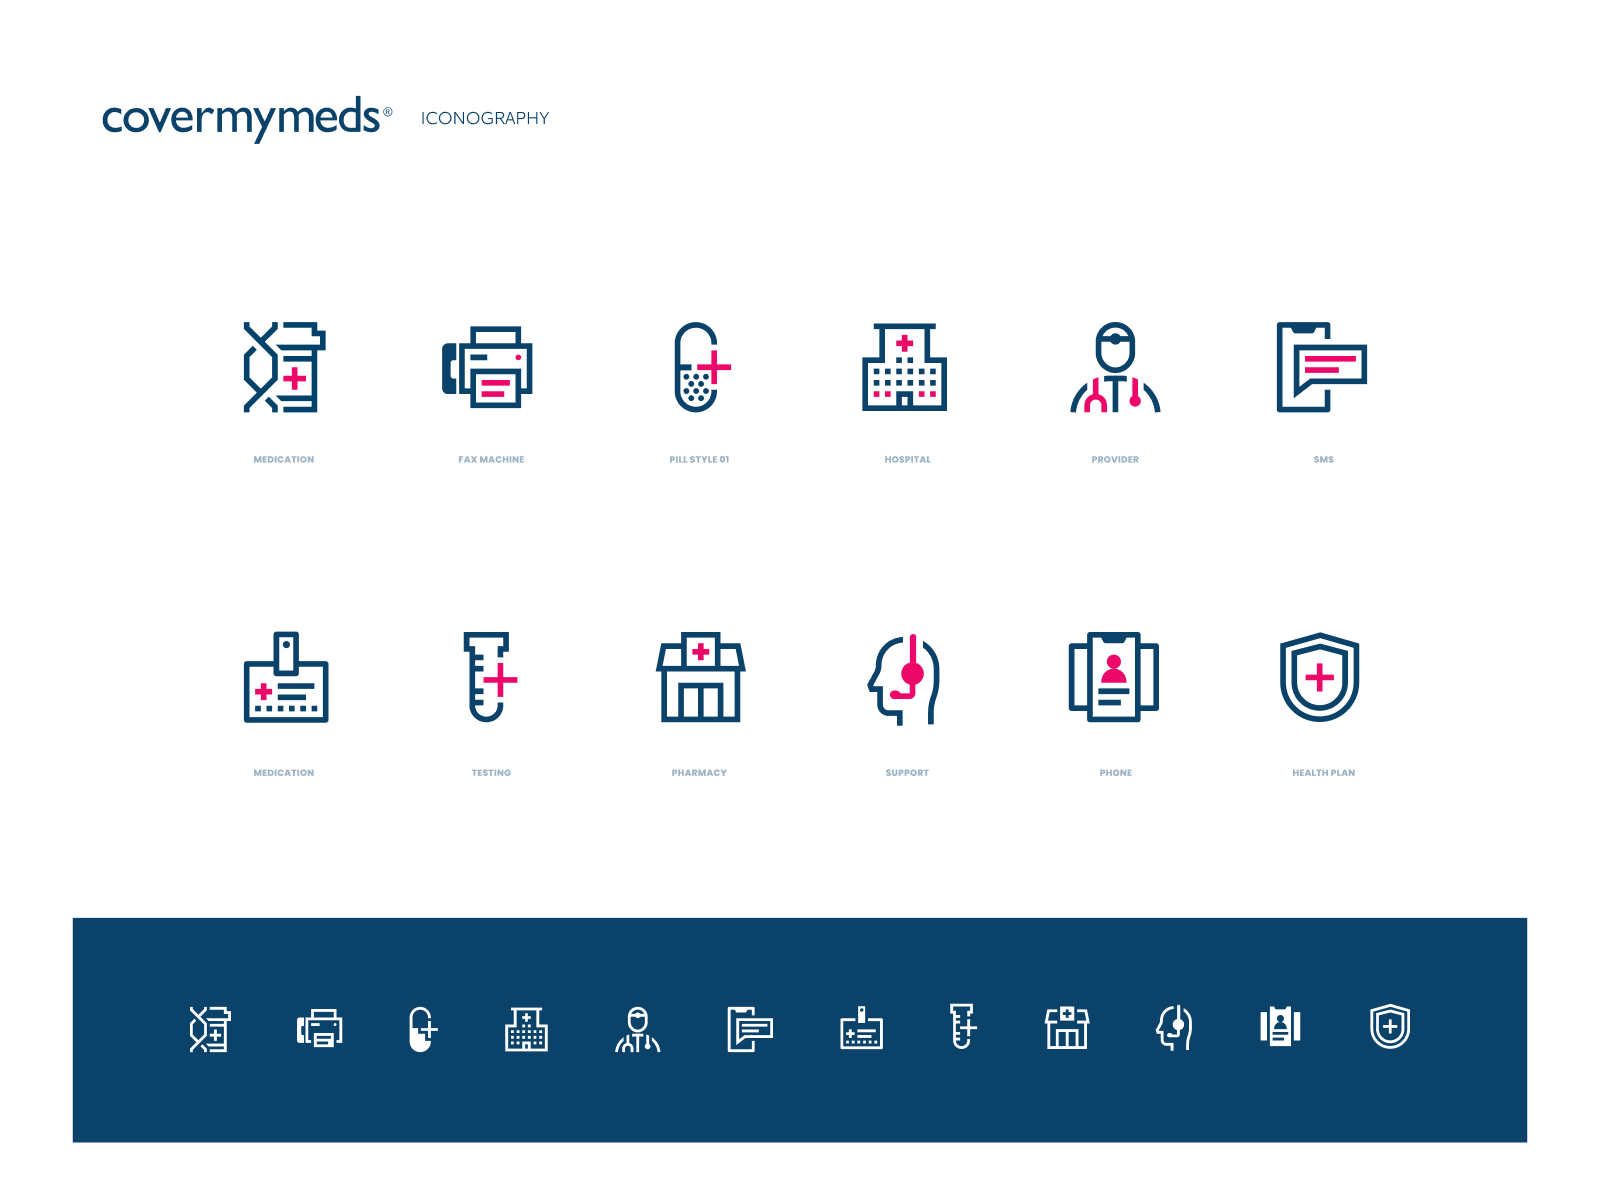 Covermymeds Iconography By Victor Korchuk For Unfold On Dribbble